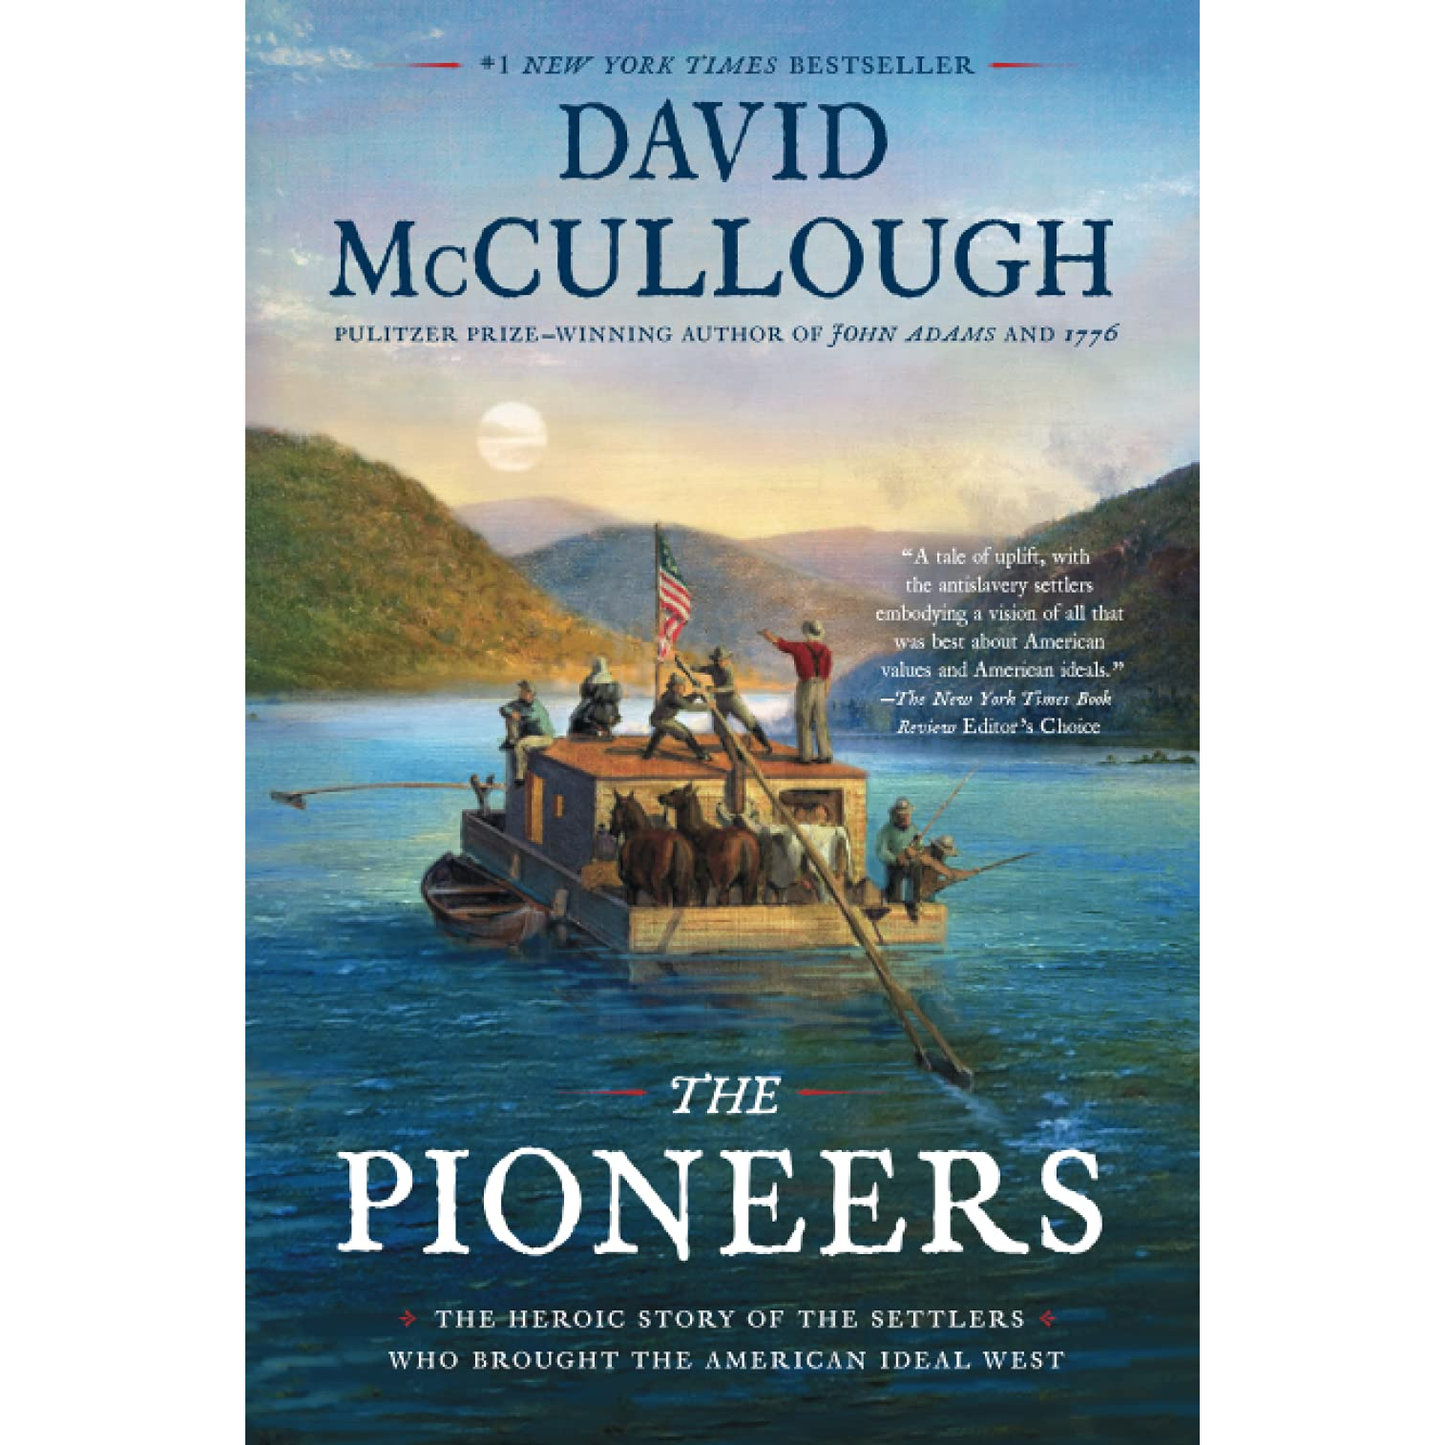 The Pioneers by David McCullough (Paperback)